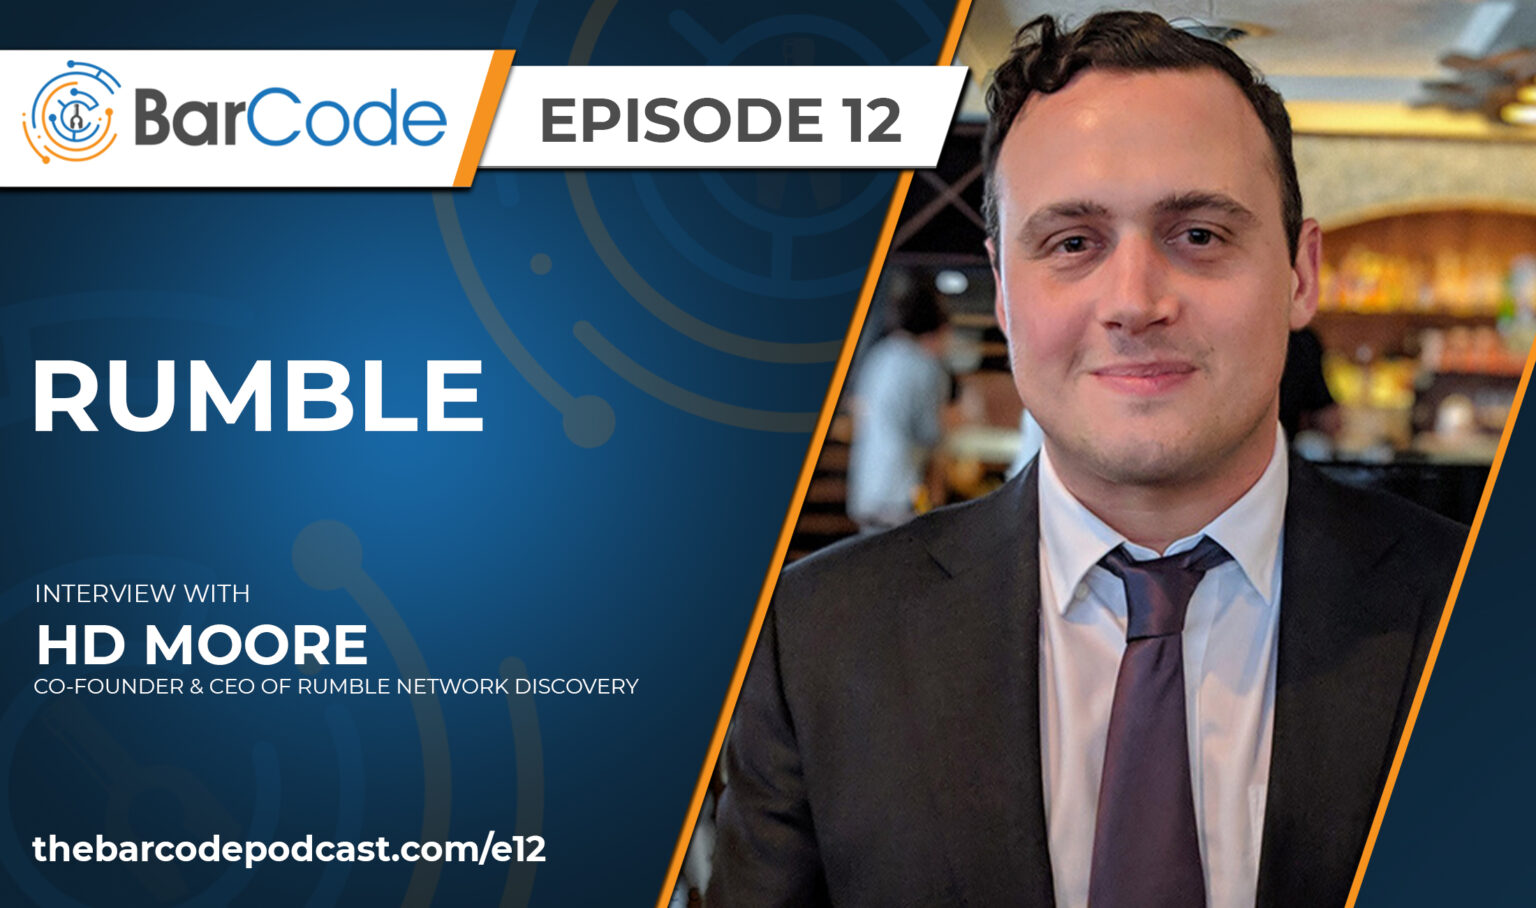 BarCode Podcast: Rumble with HD Moore